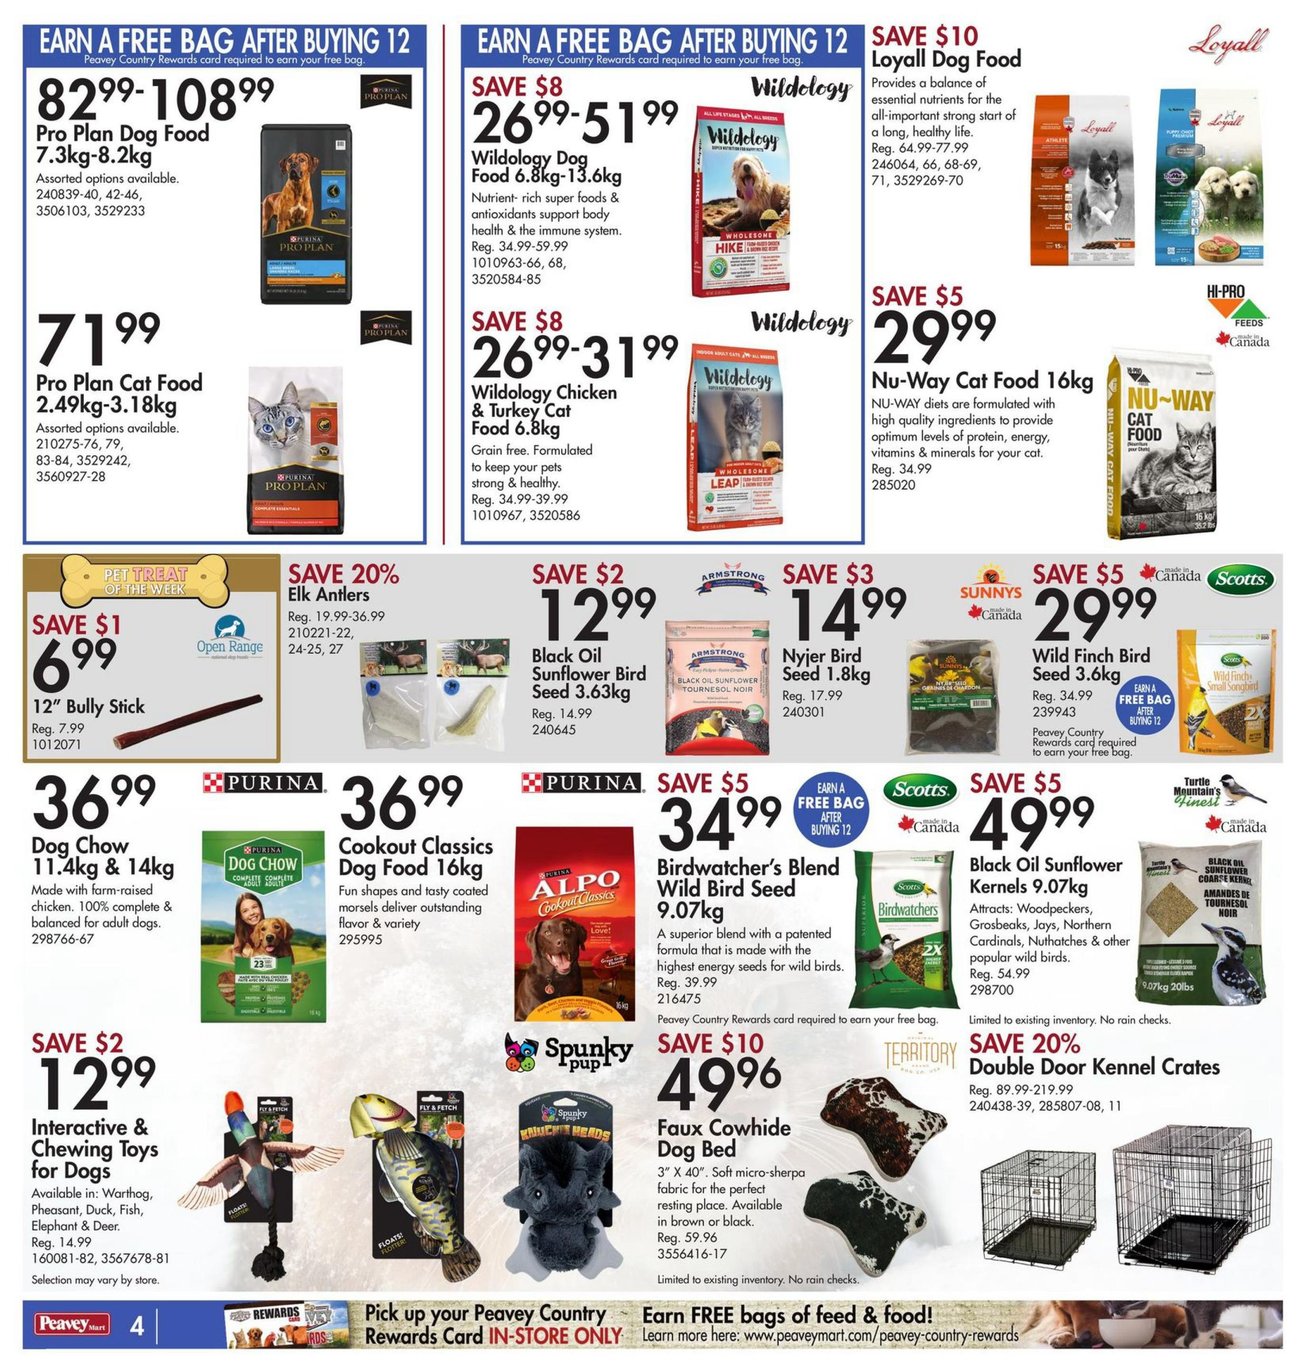 Peavey Mart - Weekly Flyer Specials - Page 5